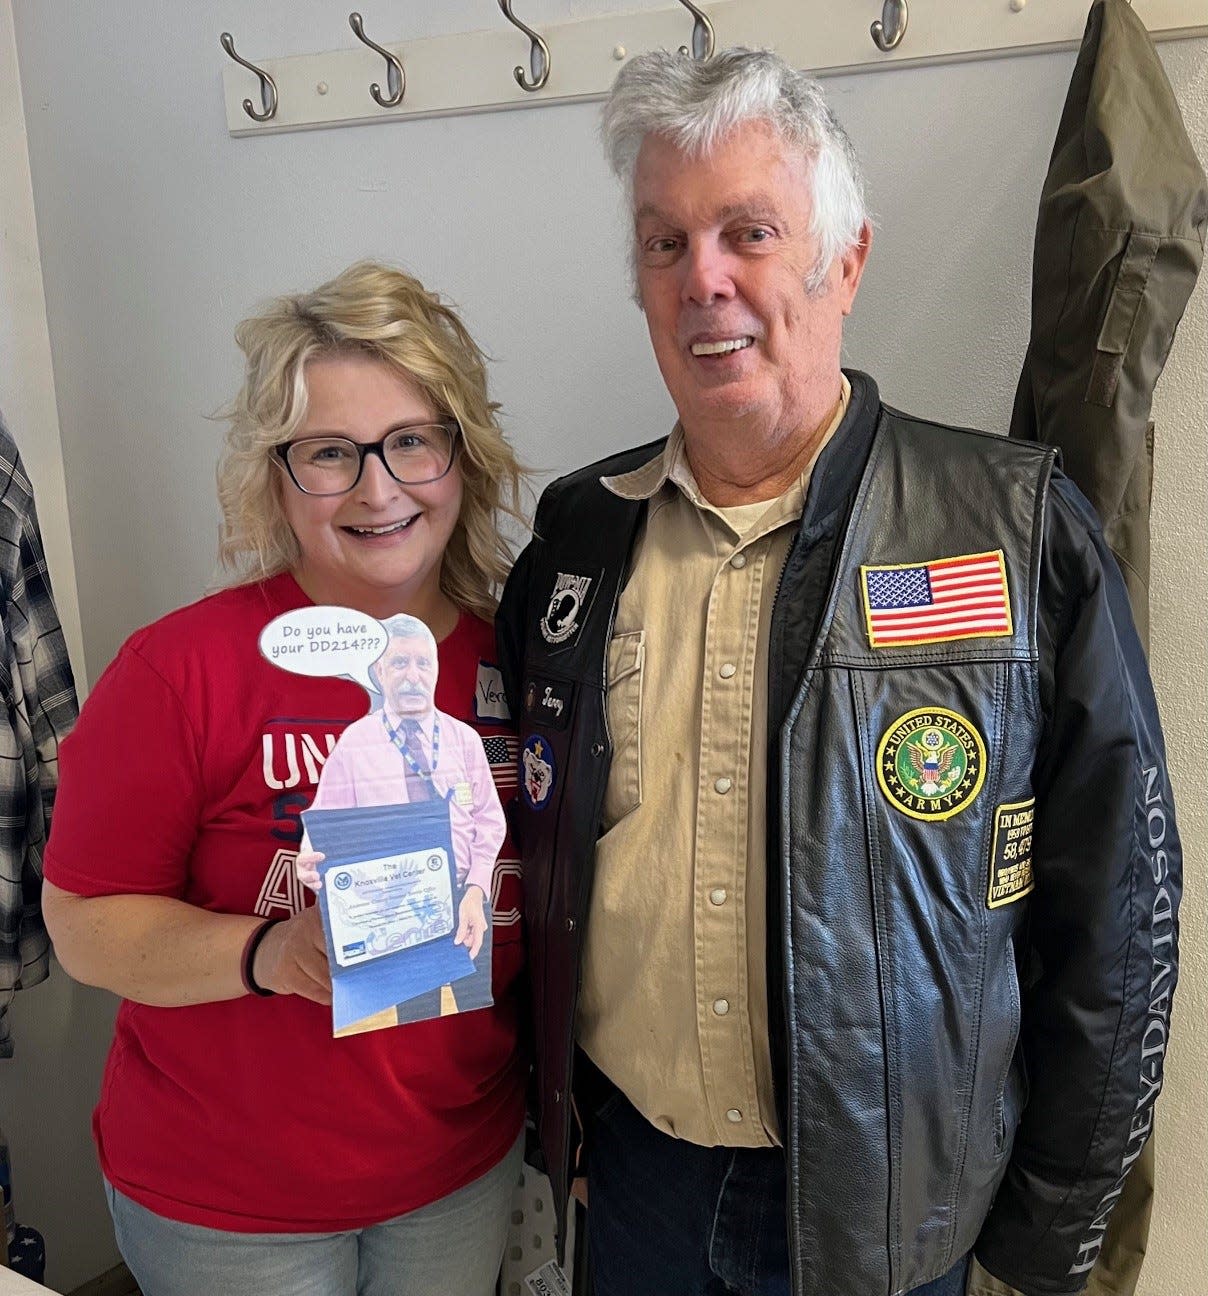 Breakfast volunteer Veronica Huff and veteran Terry Shores pose with a cardboard cutout reminder of the most commonly asked question by retired Anderson County Veteran Service Officer Leon Jaquet: “Do you have your DD214?”